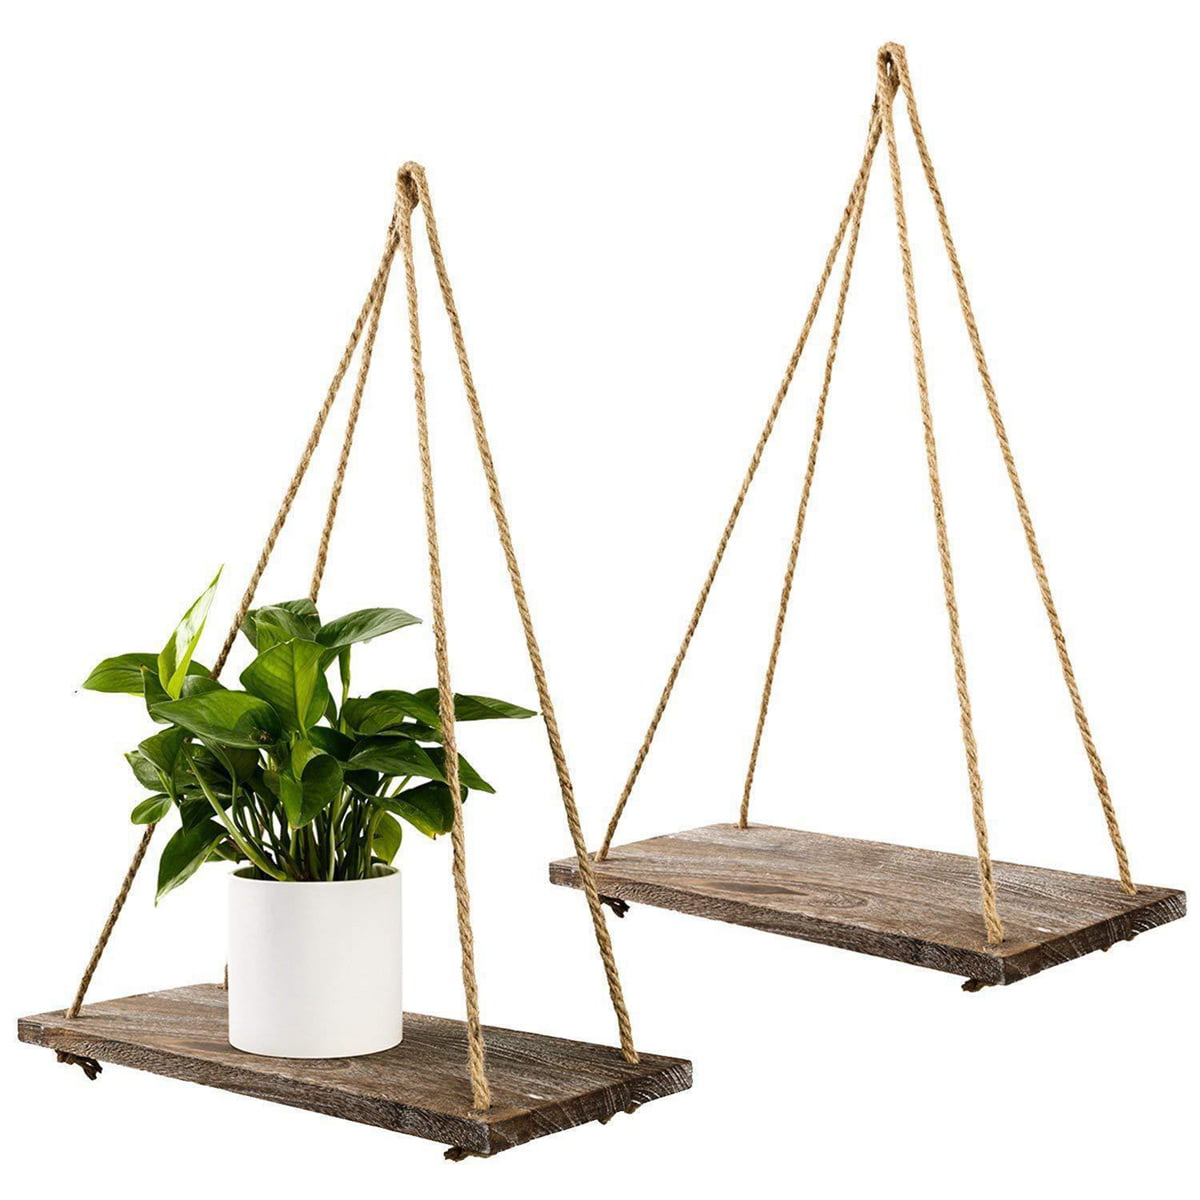 Details about   2pcs Rustic Solid Wood Rope Hanging Wall Vintage Storage display Floating Shelf 